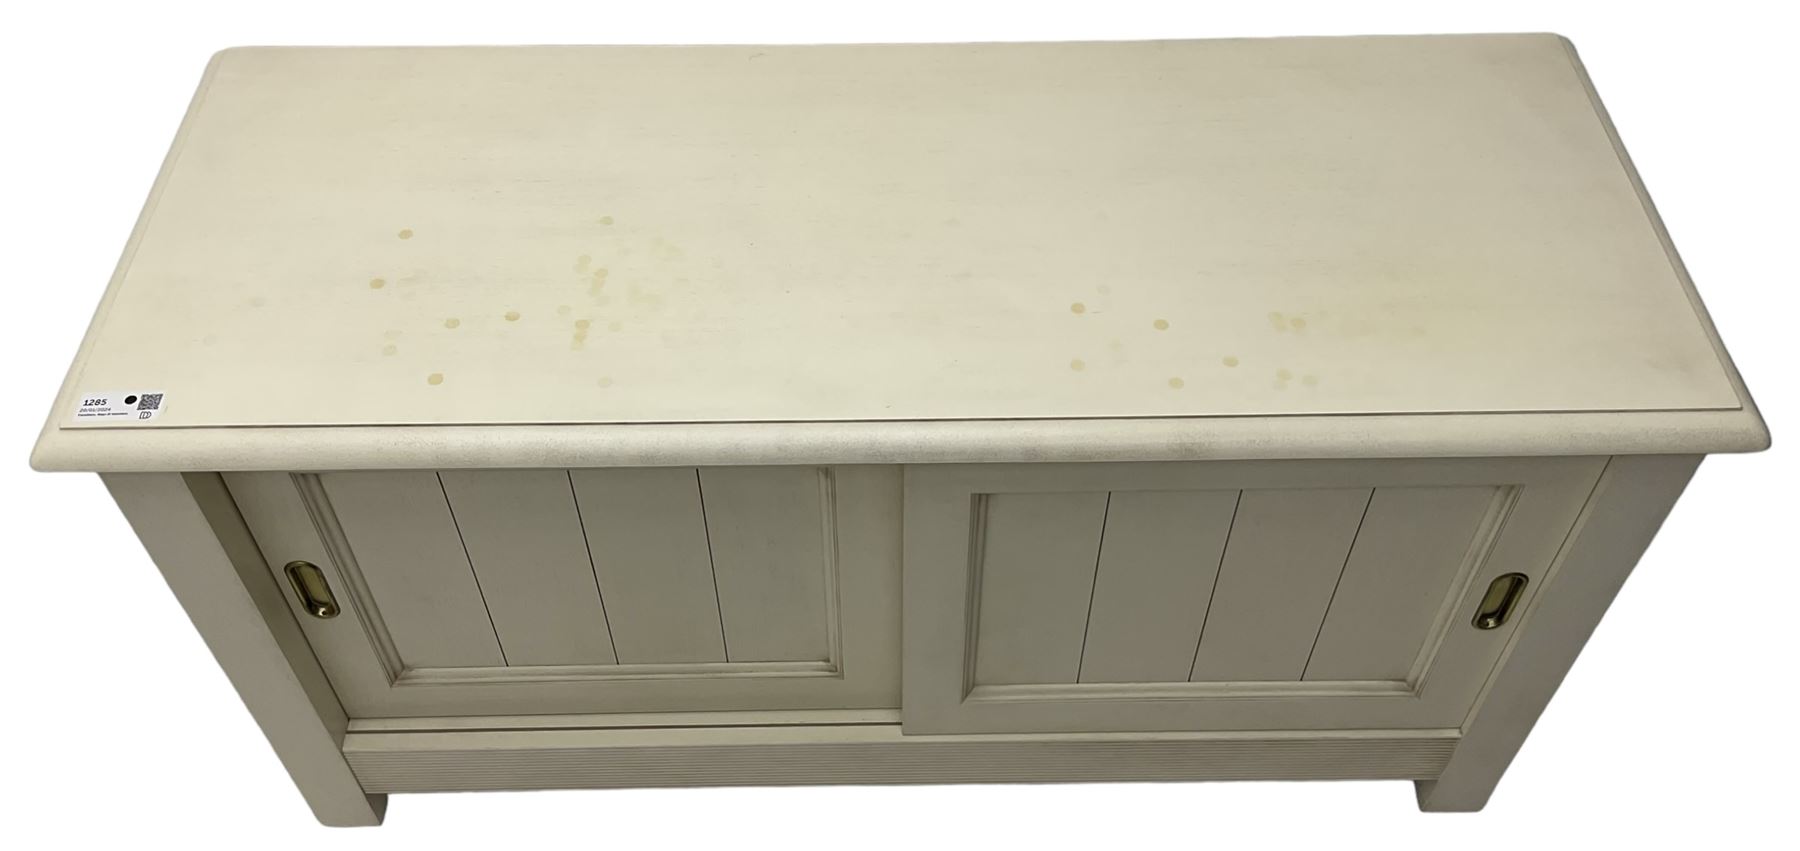 Cream finish low side cabinet - Image 6 of 6